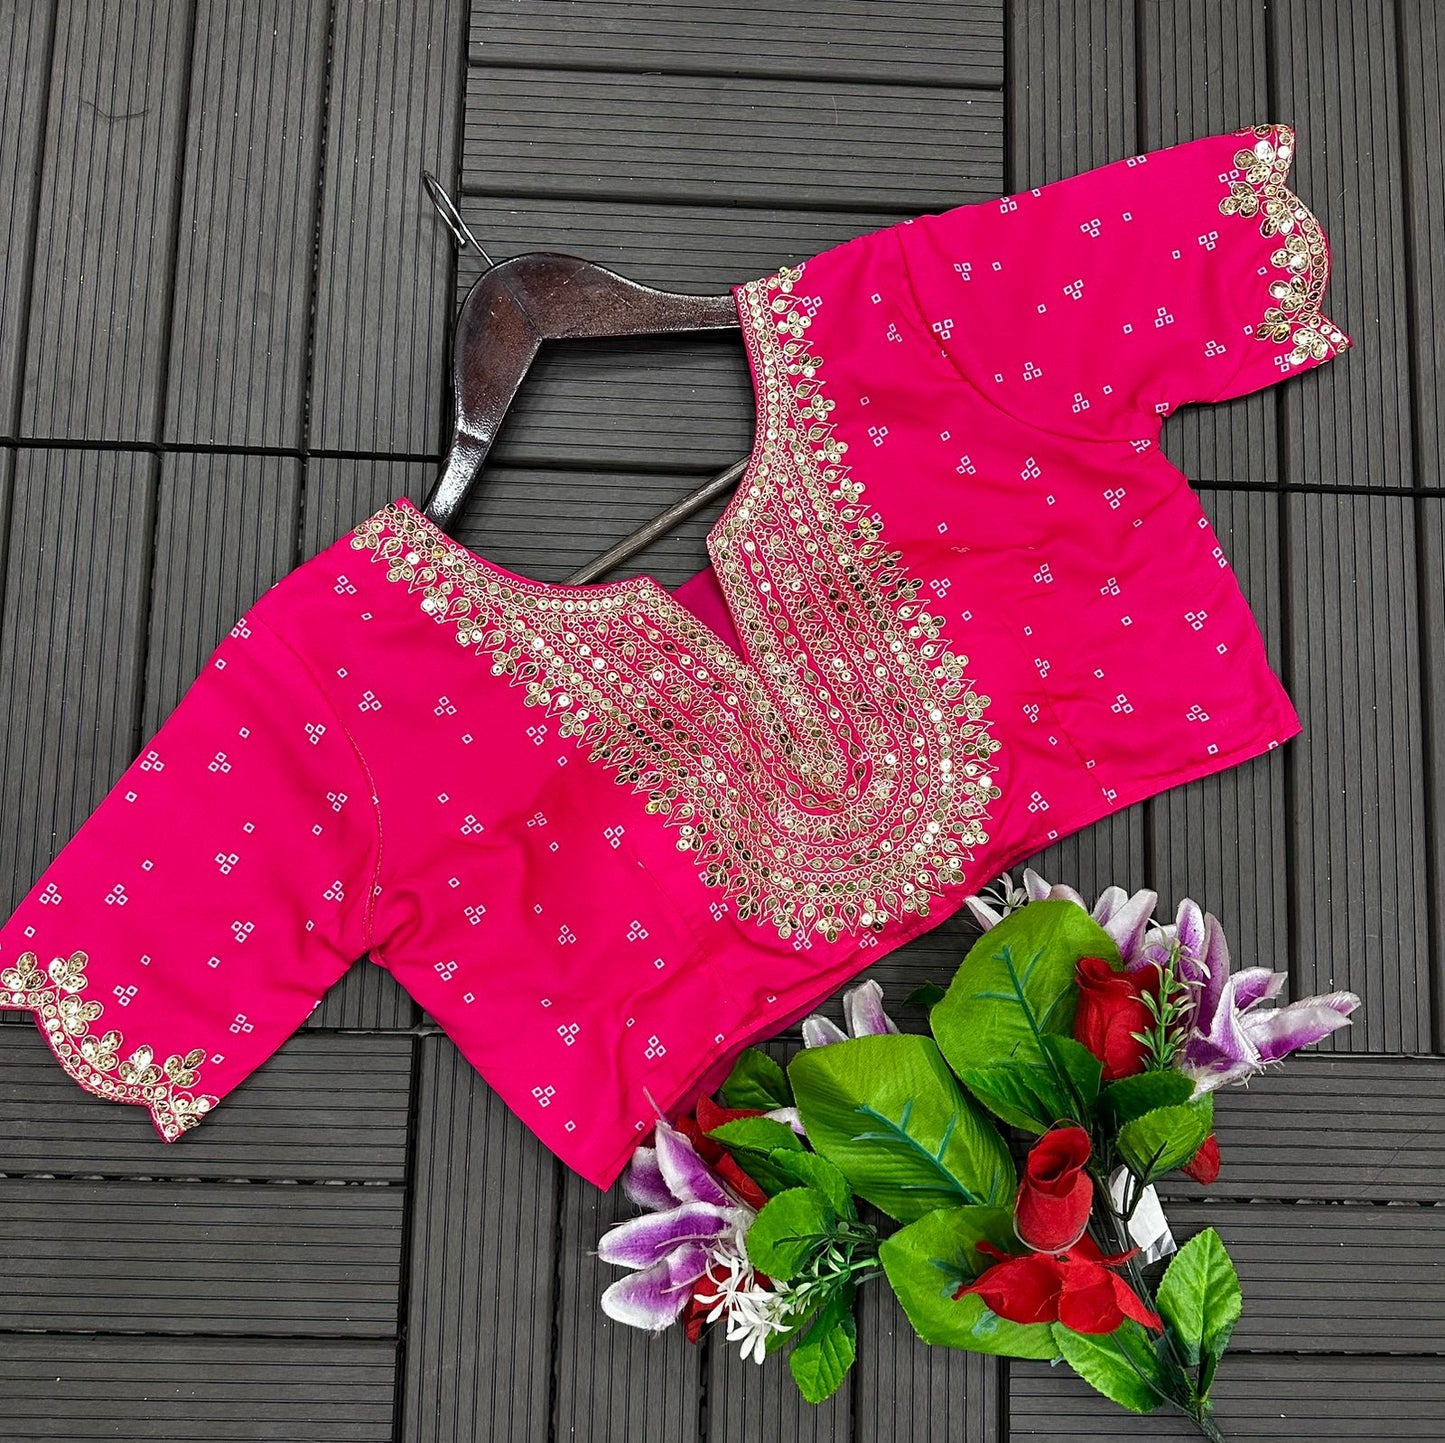 Elevate Your Style with our New Launch: Embroidery Work Digital Print Lehenga Choli